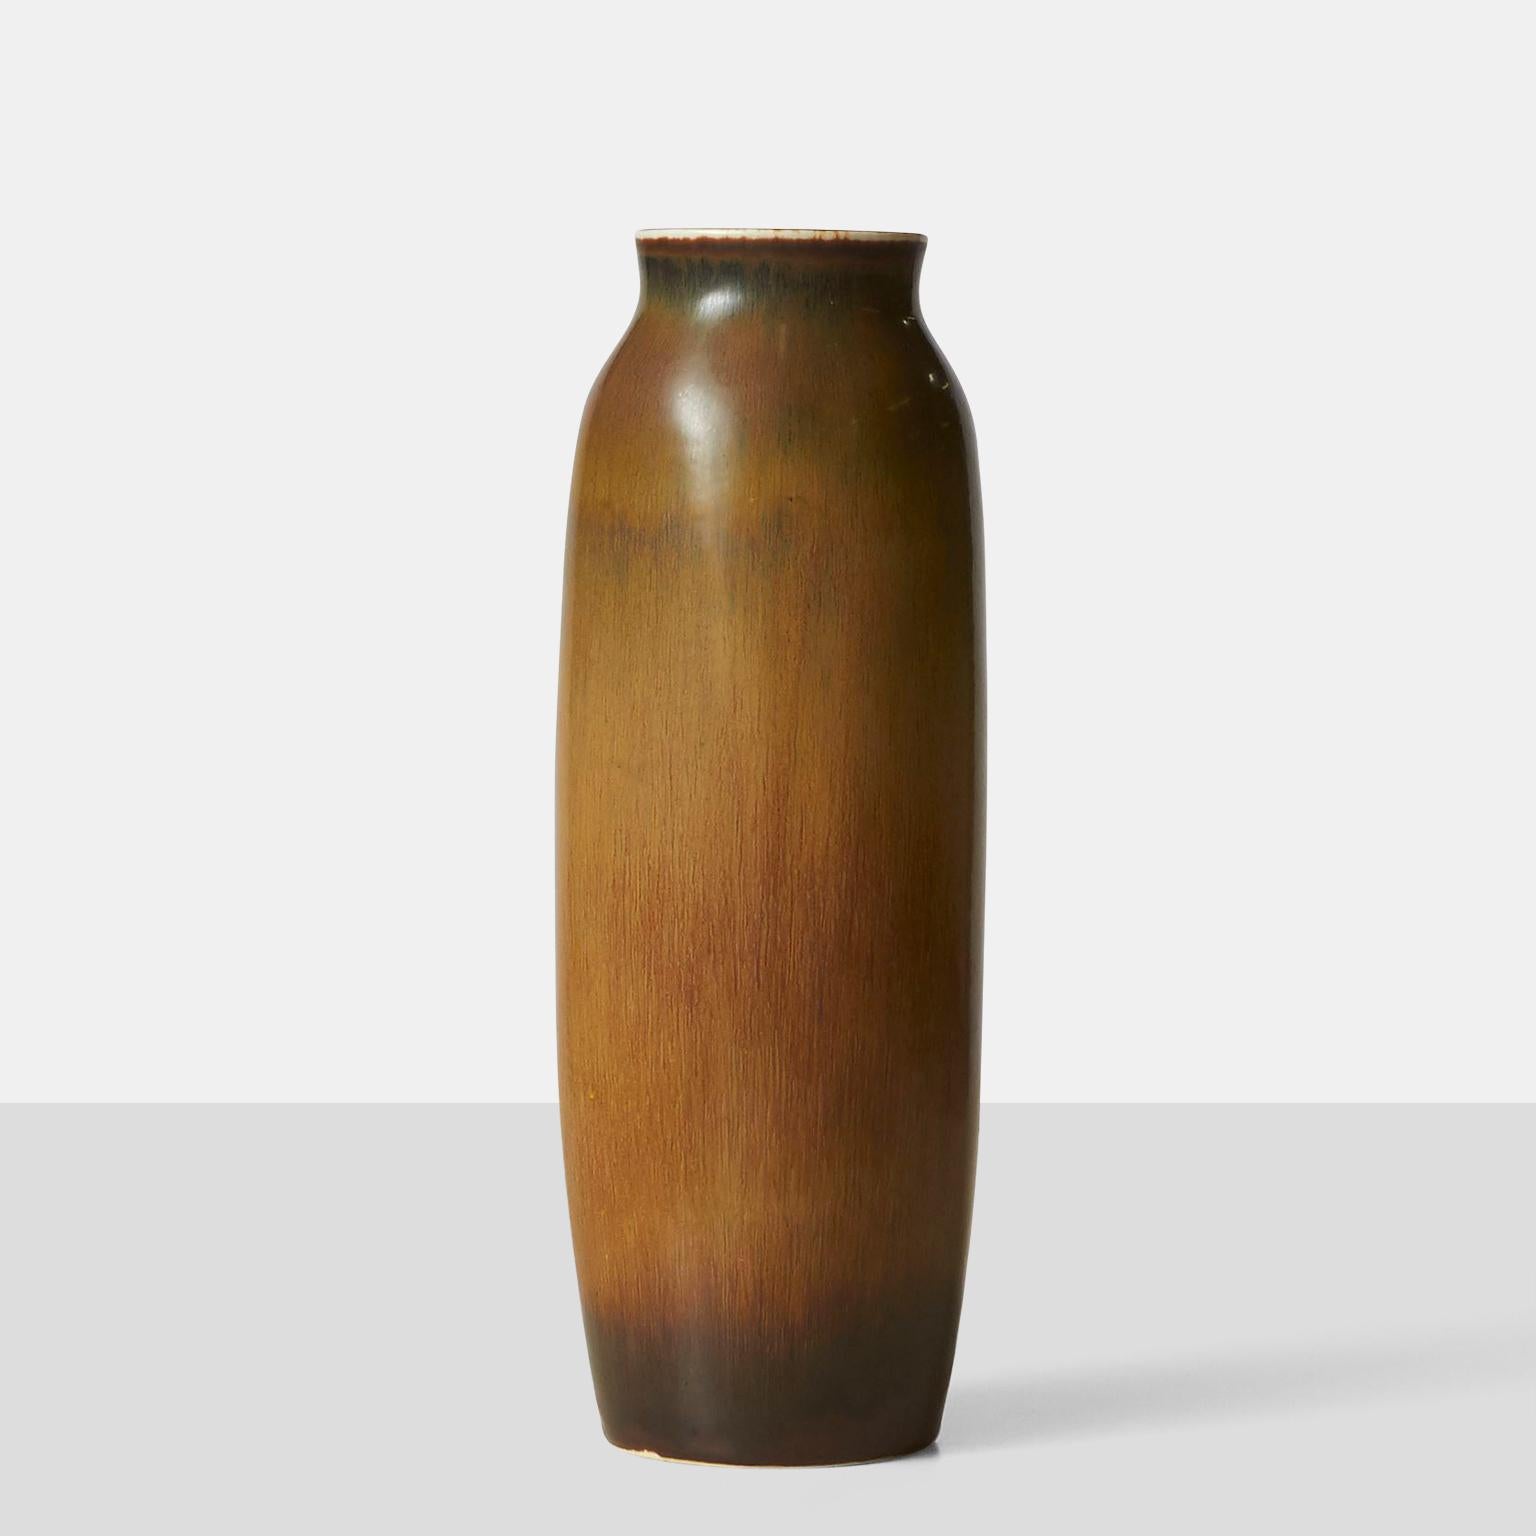 A Carl-Harry Stalhane vase in hare's fur glaze of tans and cinnamon. Crafted by Rörstrand in the 1960s, and inscribed by the artist.